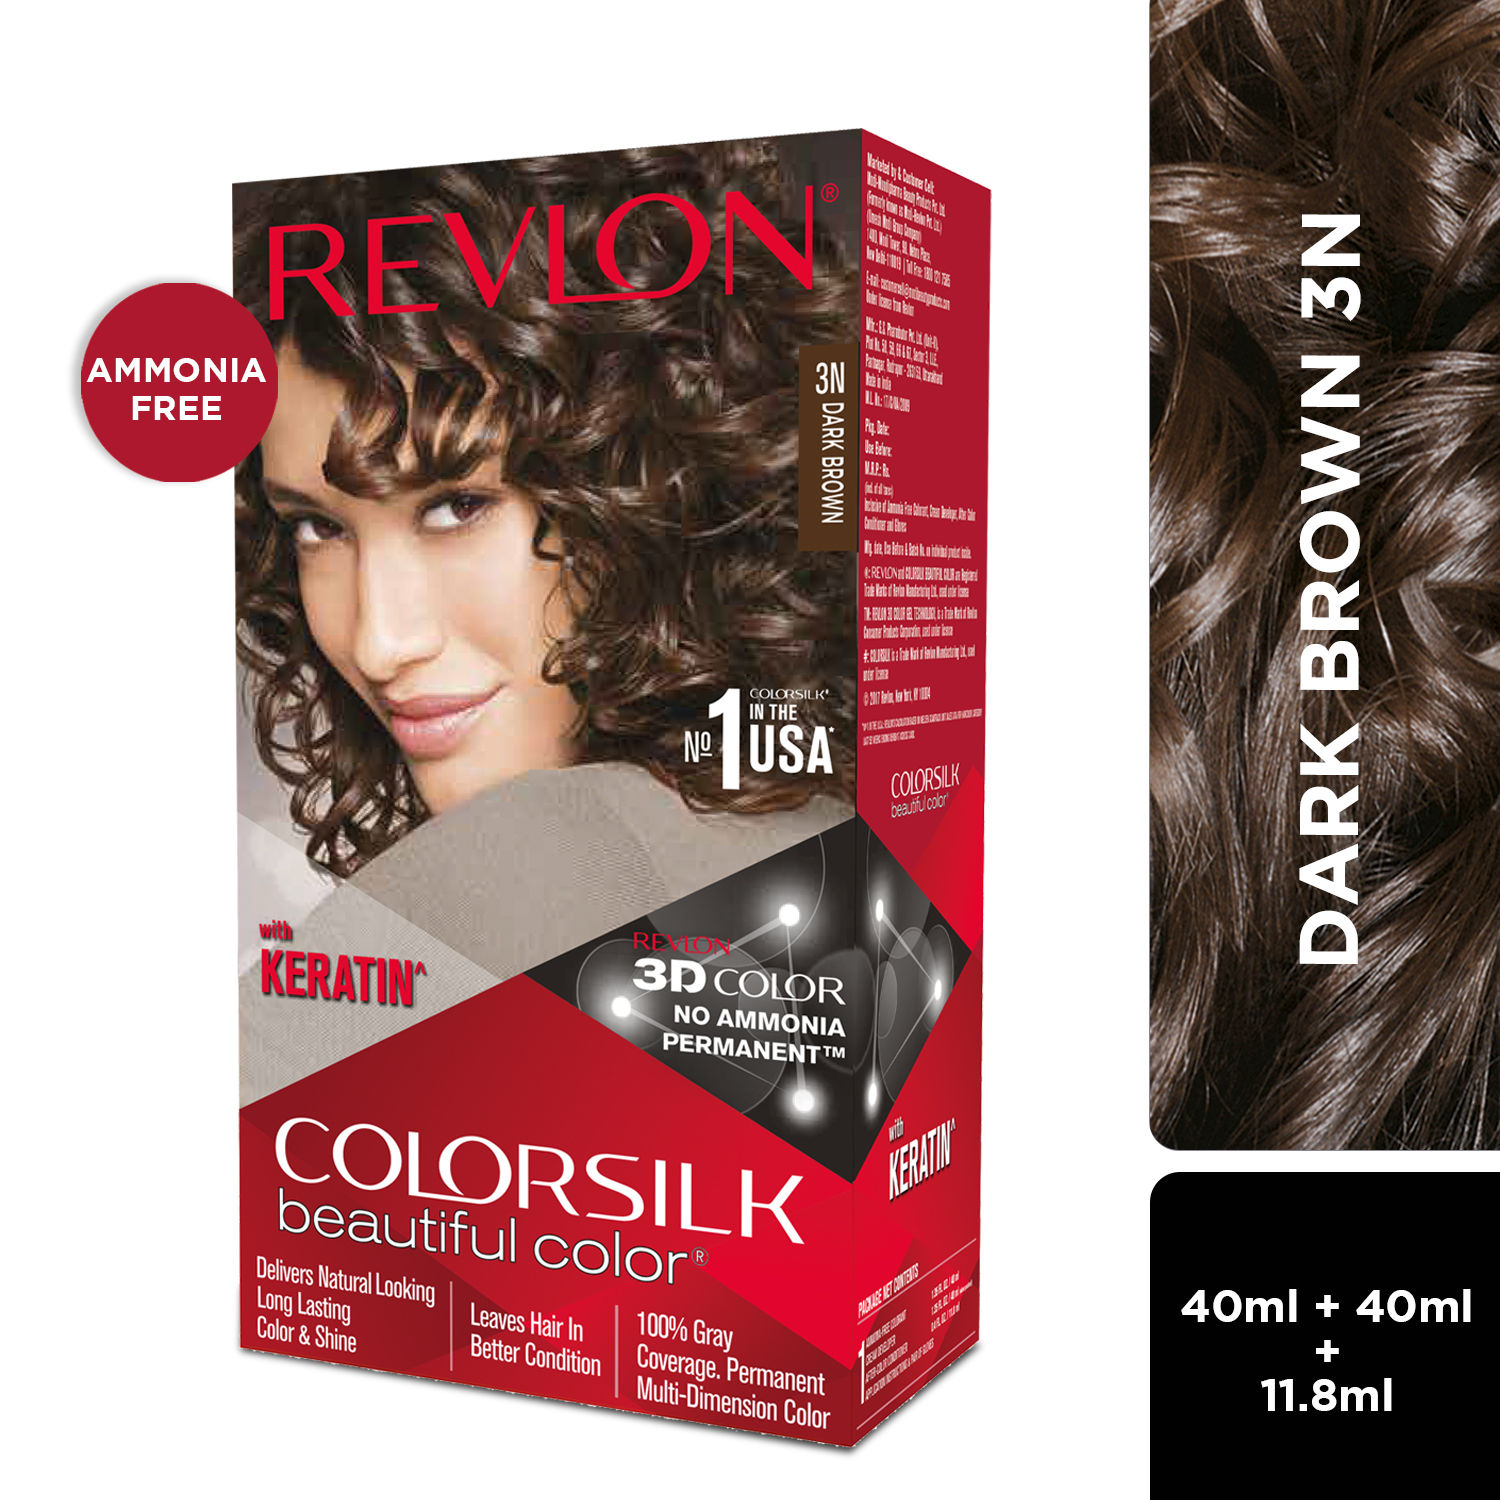 The Best Hair Dye for Dark Hair Without Bleach  PureWow